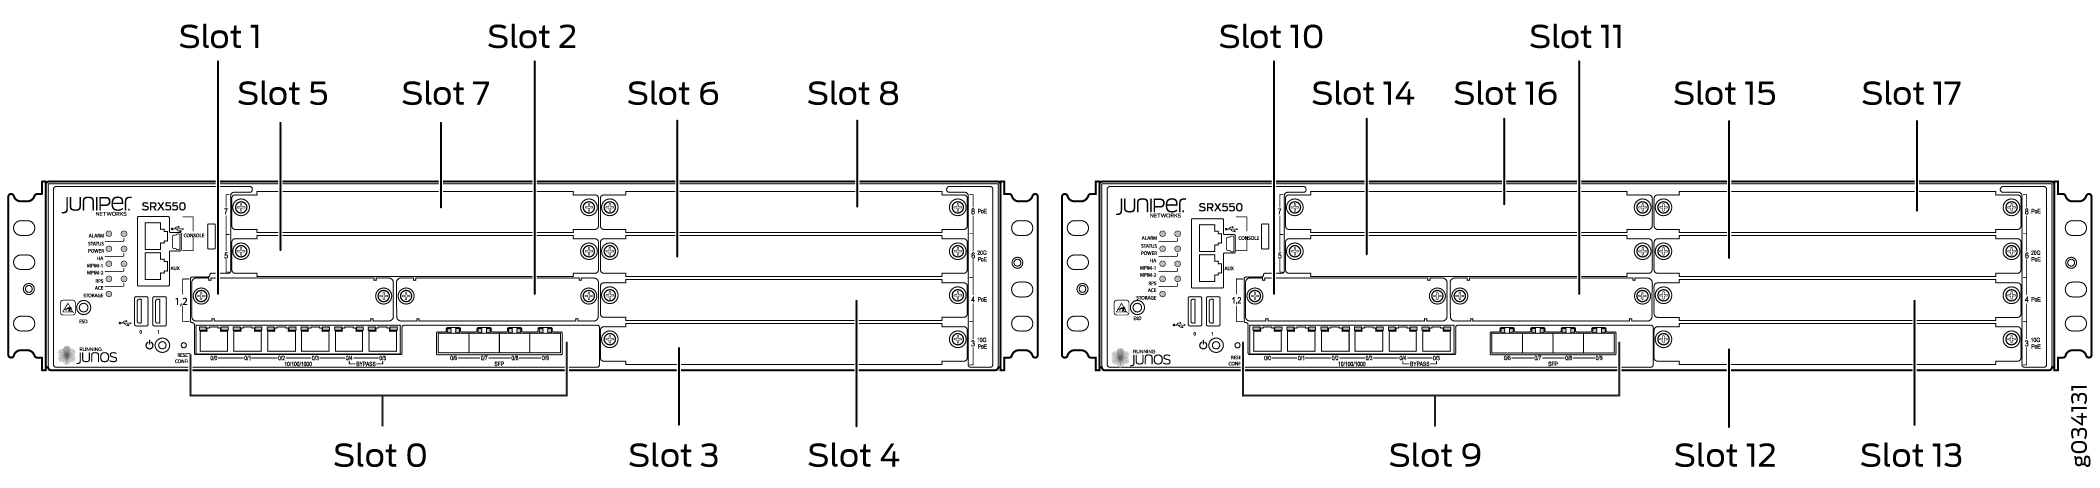 Slot Numbering for SRX550M Devices